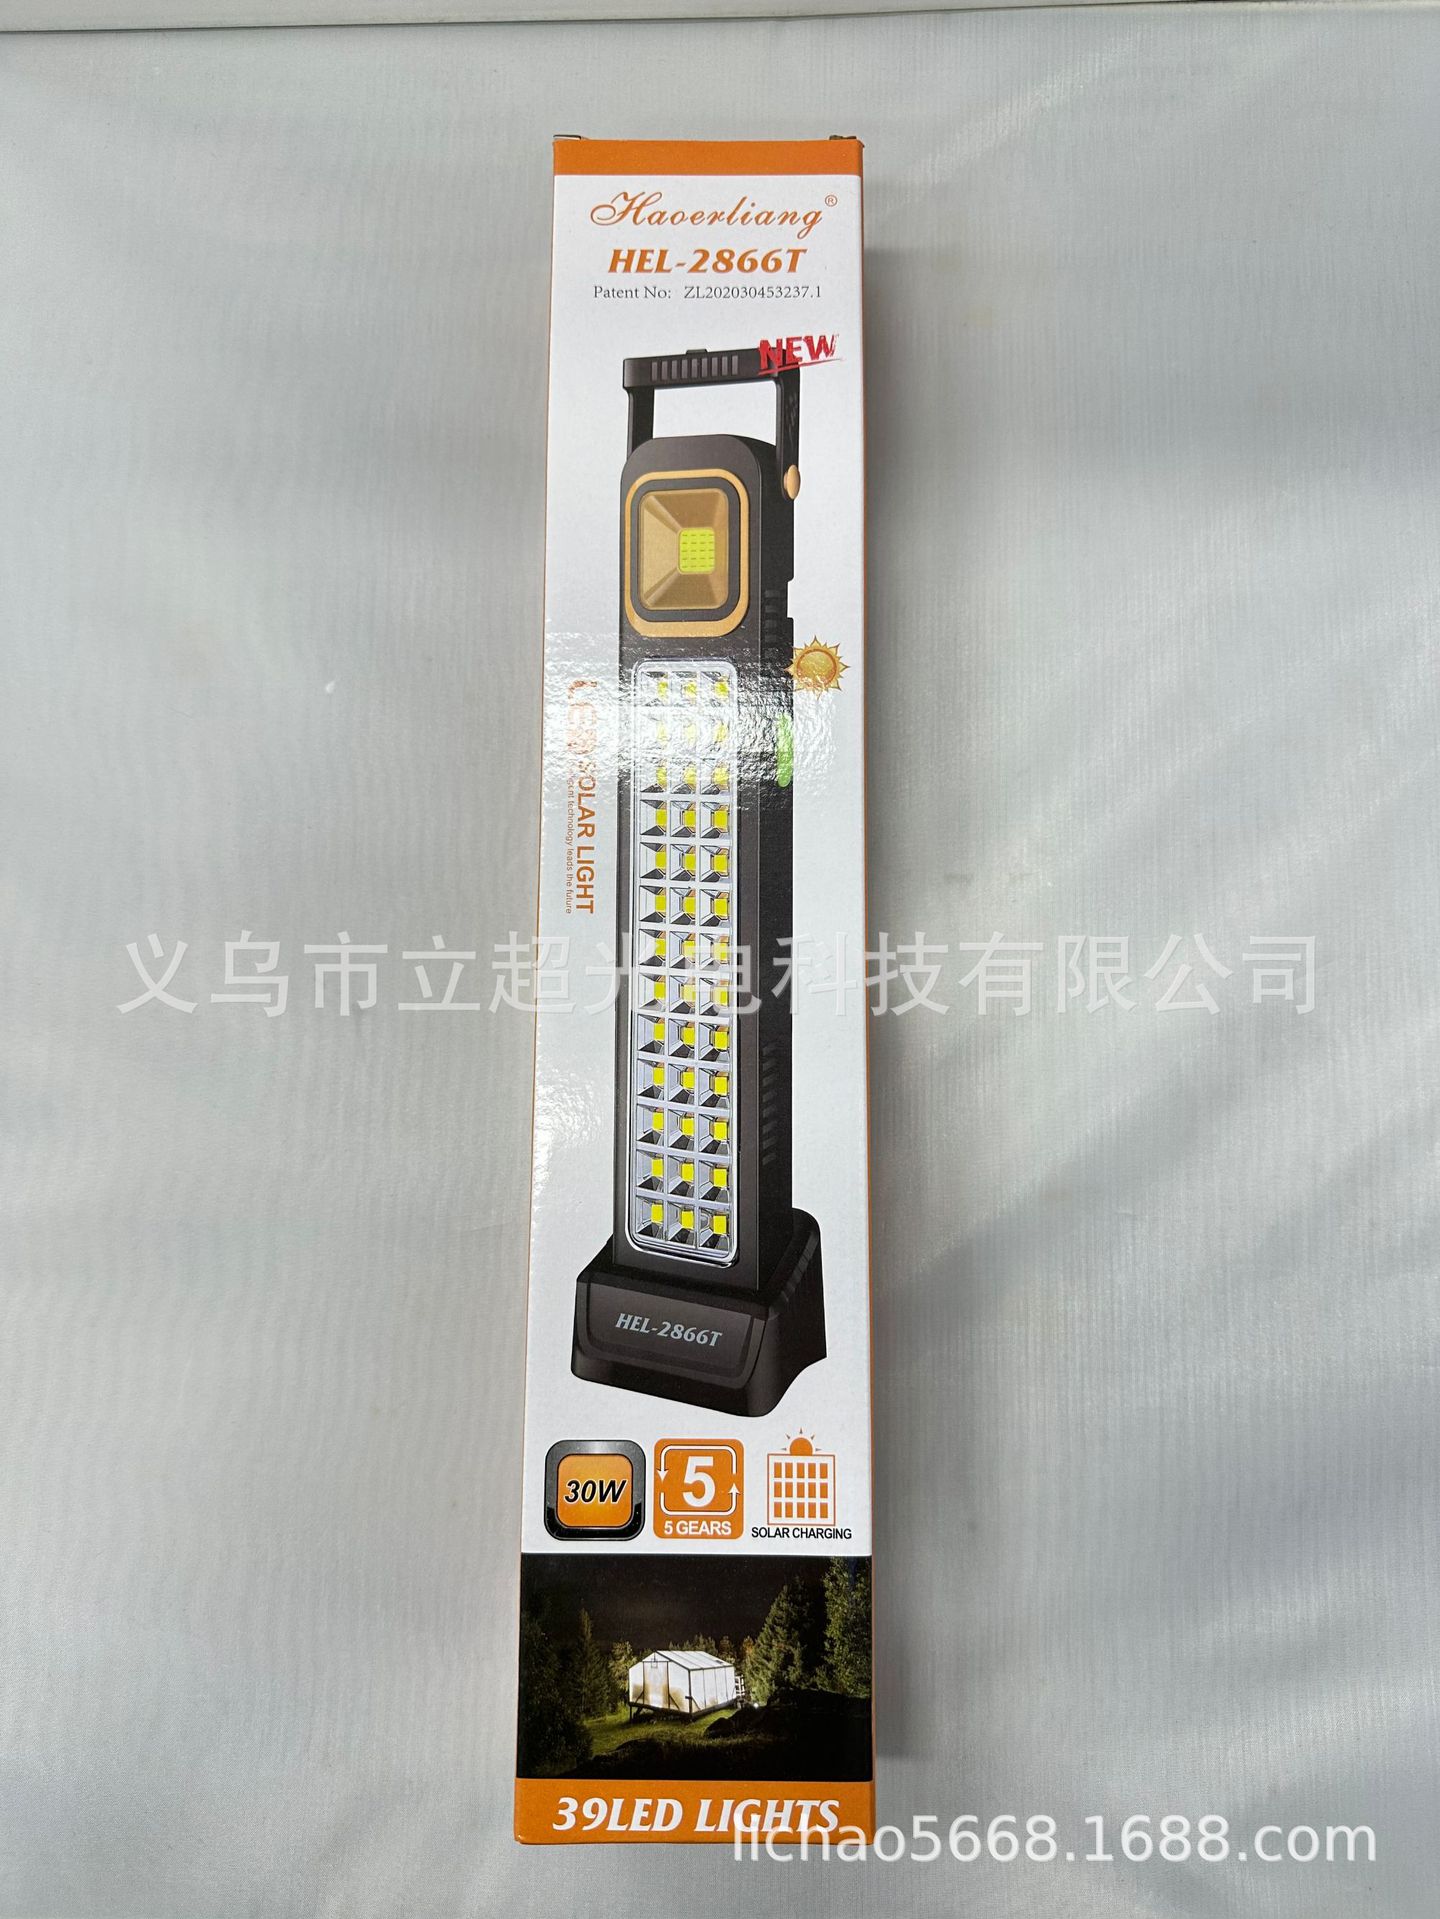 New Solar Emergency Lamp Fire Portable Super Bright Long Shot Charging Fast Battery Life